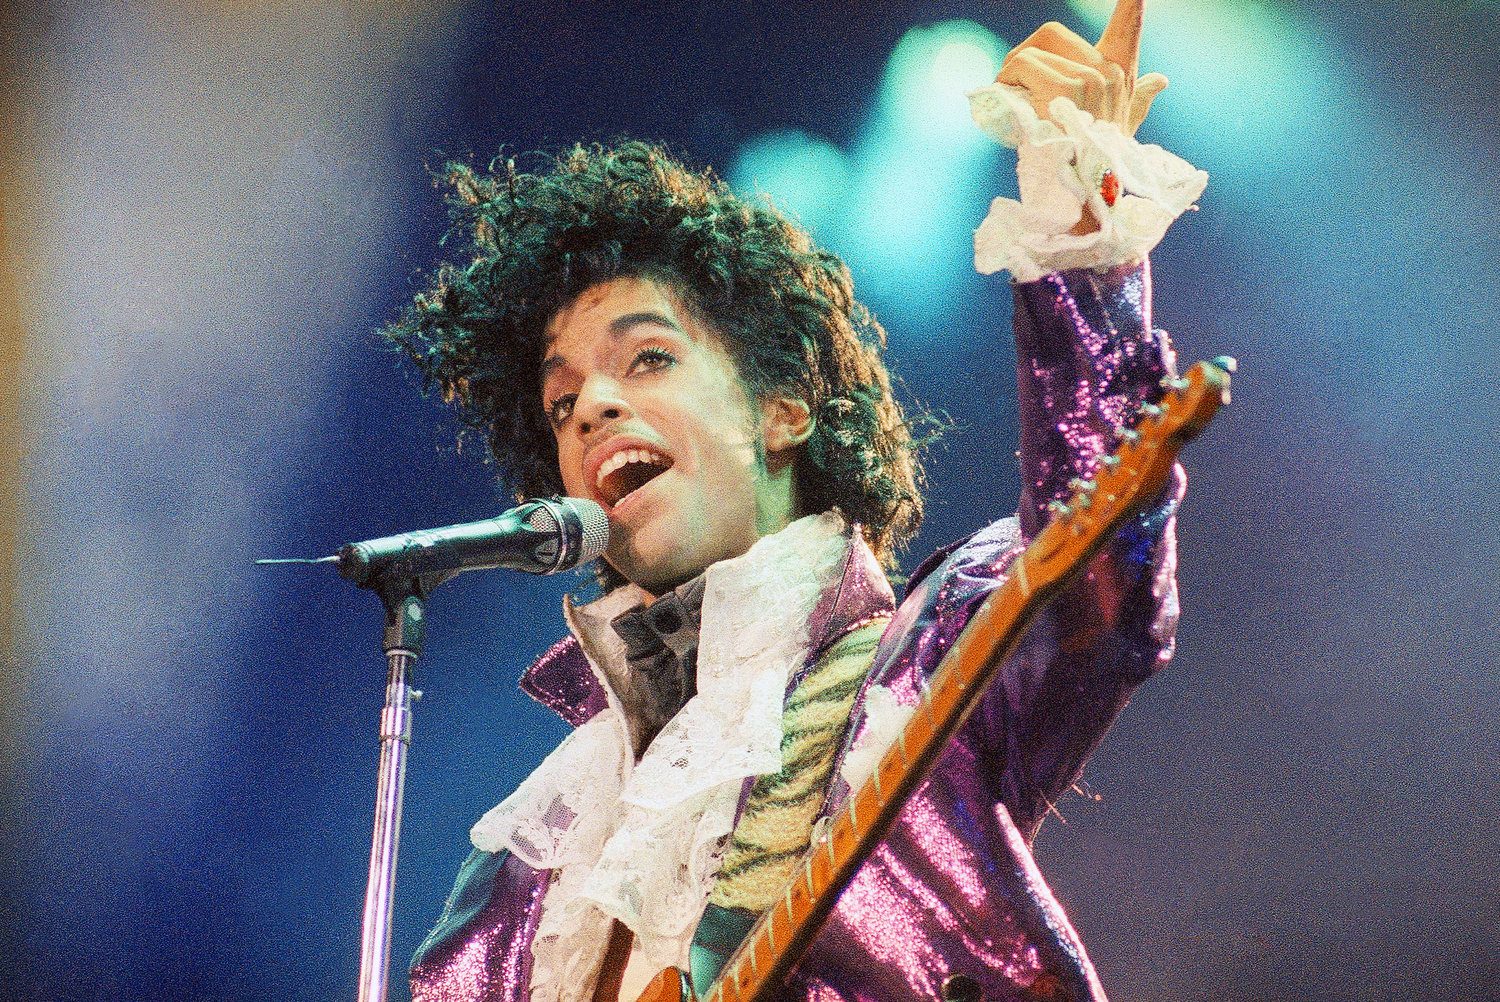 Prince performs before a sold-out audience in Houston on Jan. 11, 1985. A reworked and re-released concert that captures Prince &amp; The Revolution at their peak is coming next month.